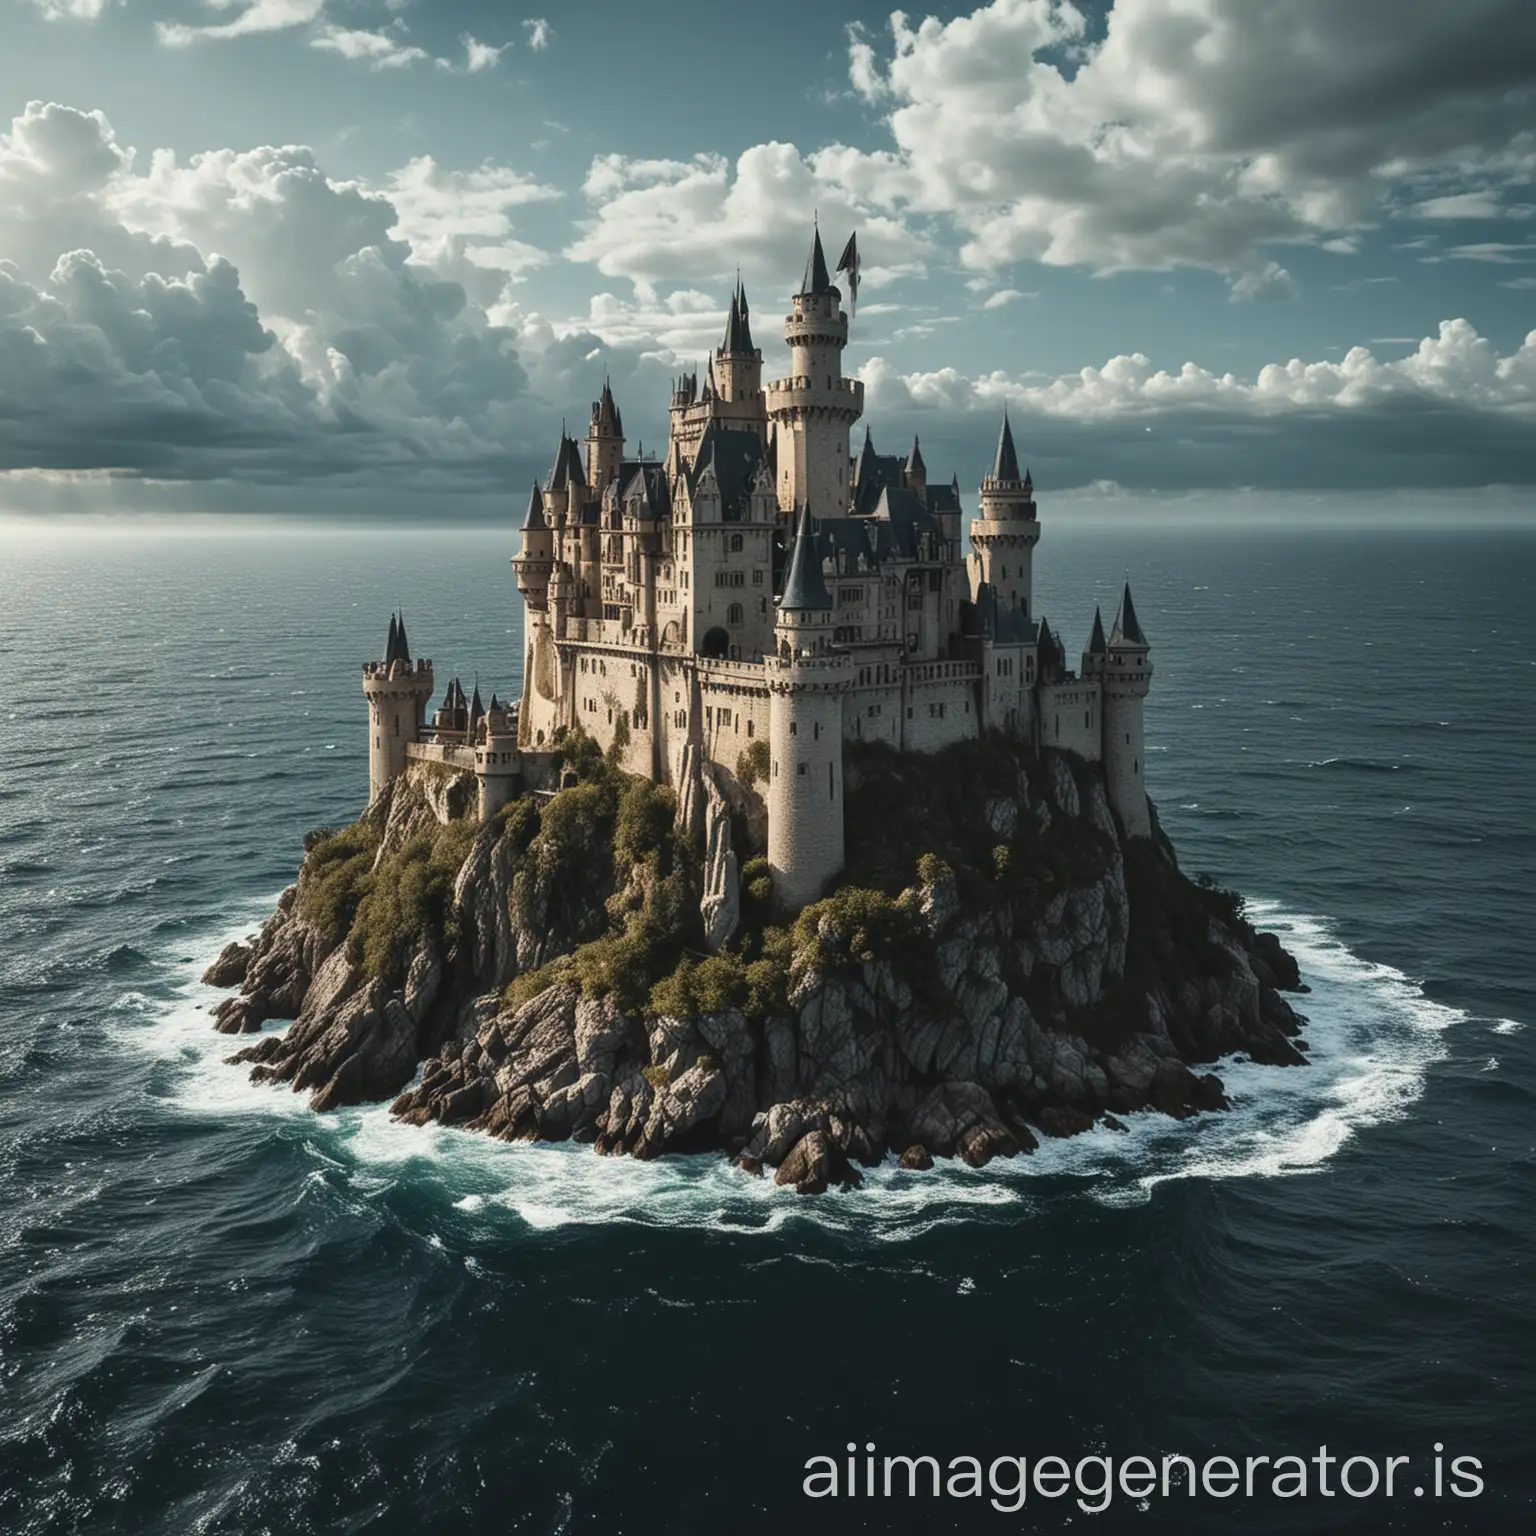 Majestic-Castle-Rising-from-the-Heart-of-the-Ocean